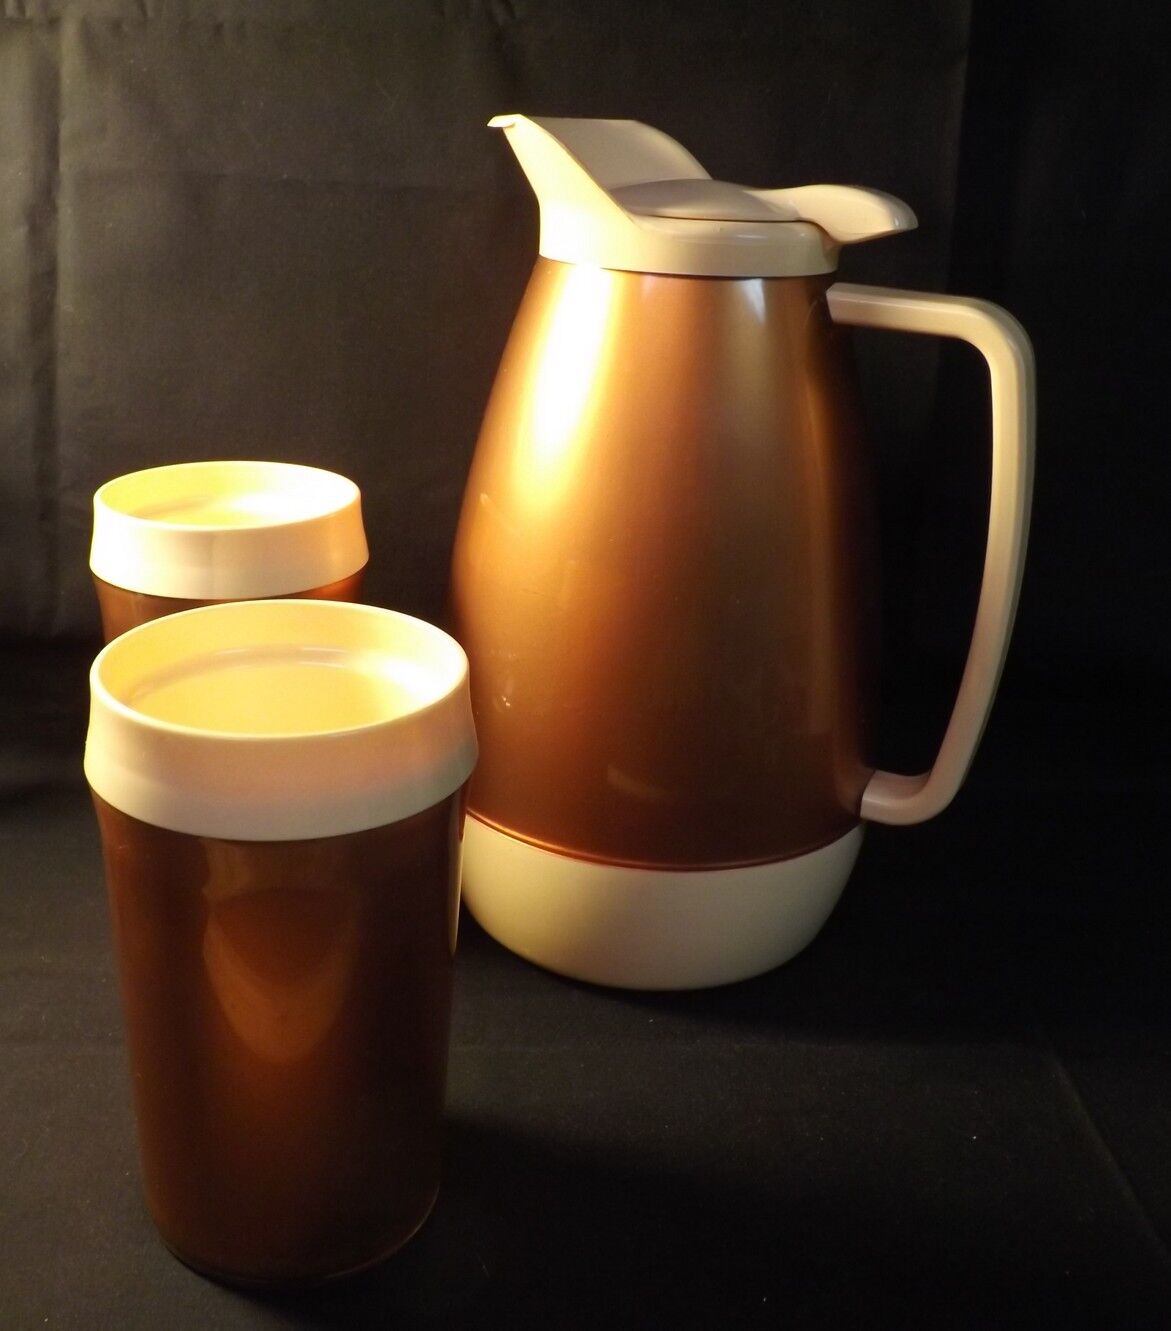 Thermo-Serv Insulated Pitcher and 2 Matching Glasses. Condition is Good